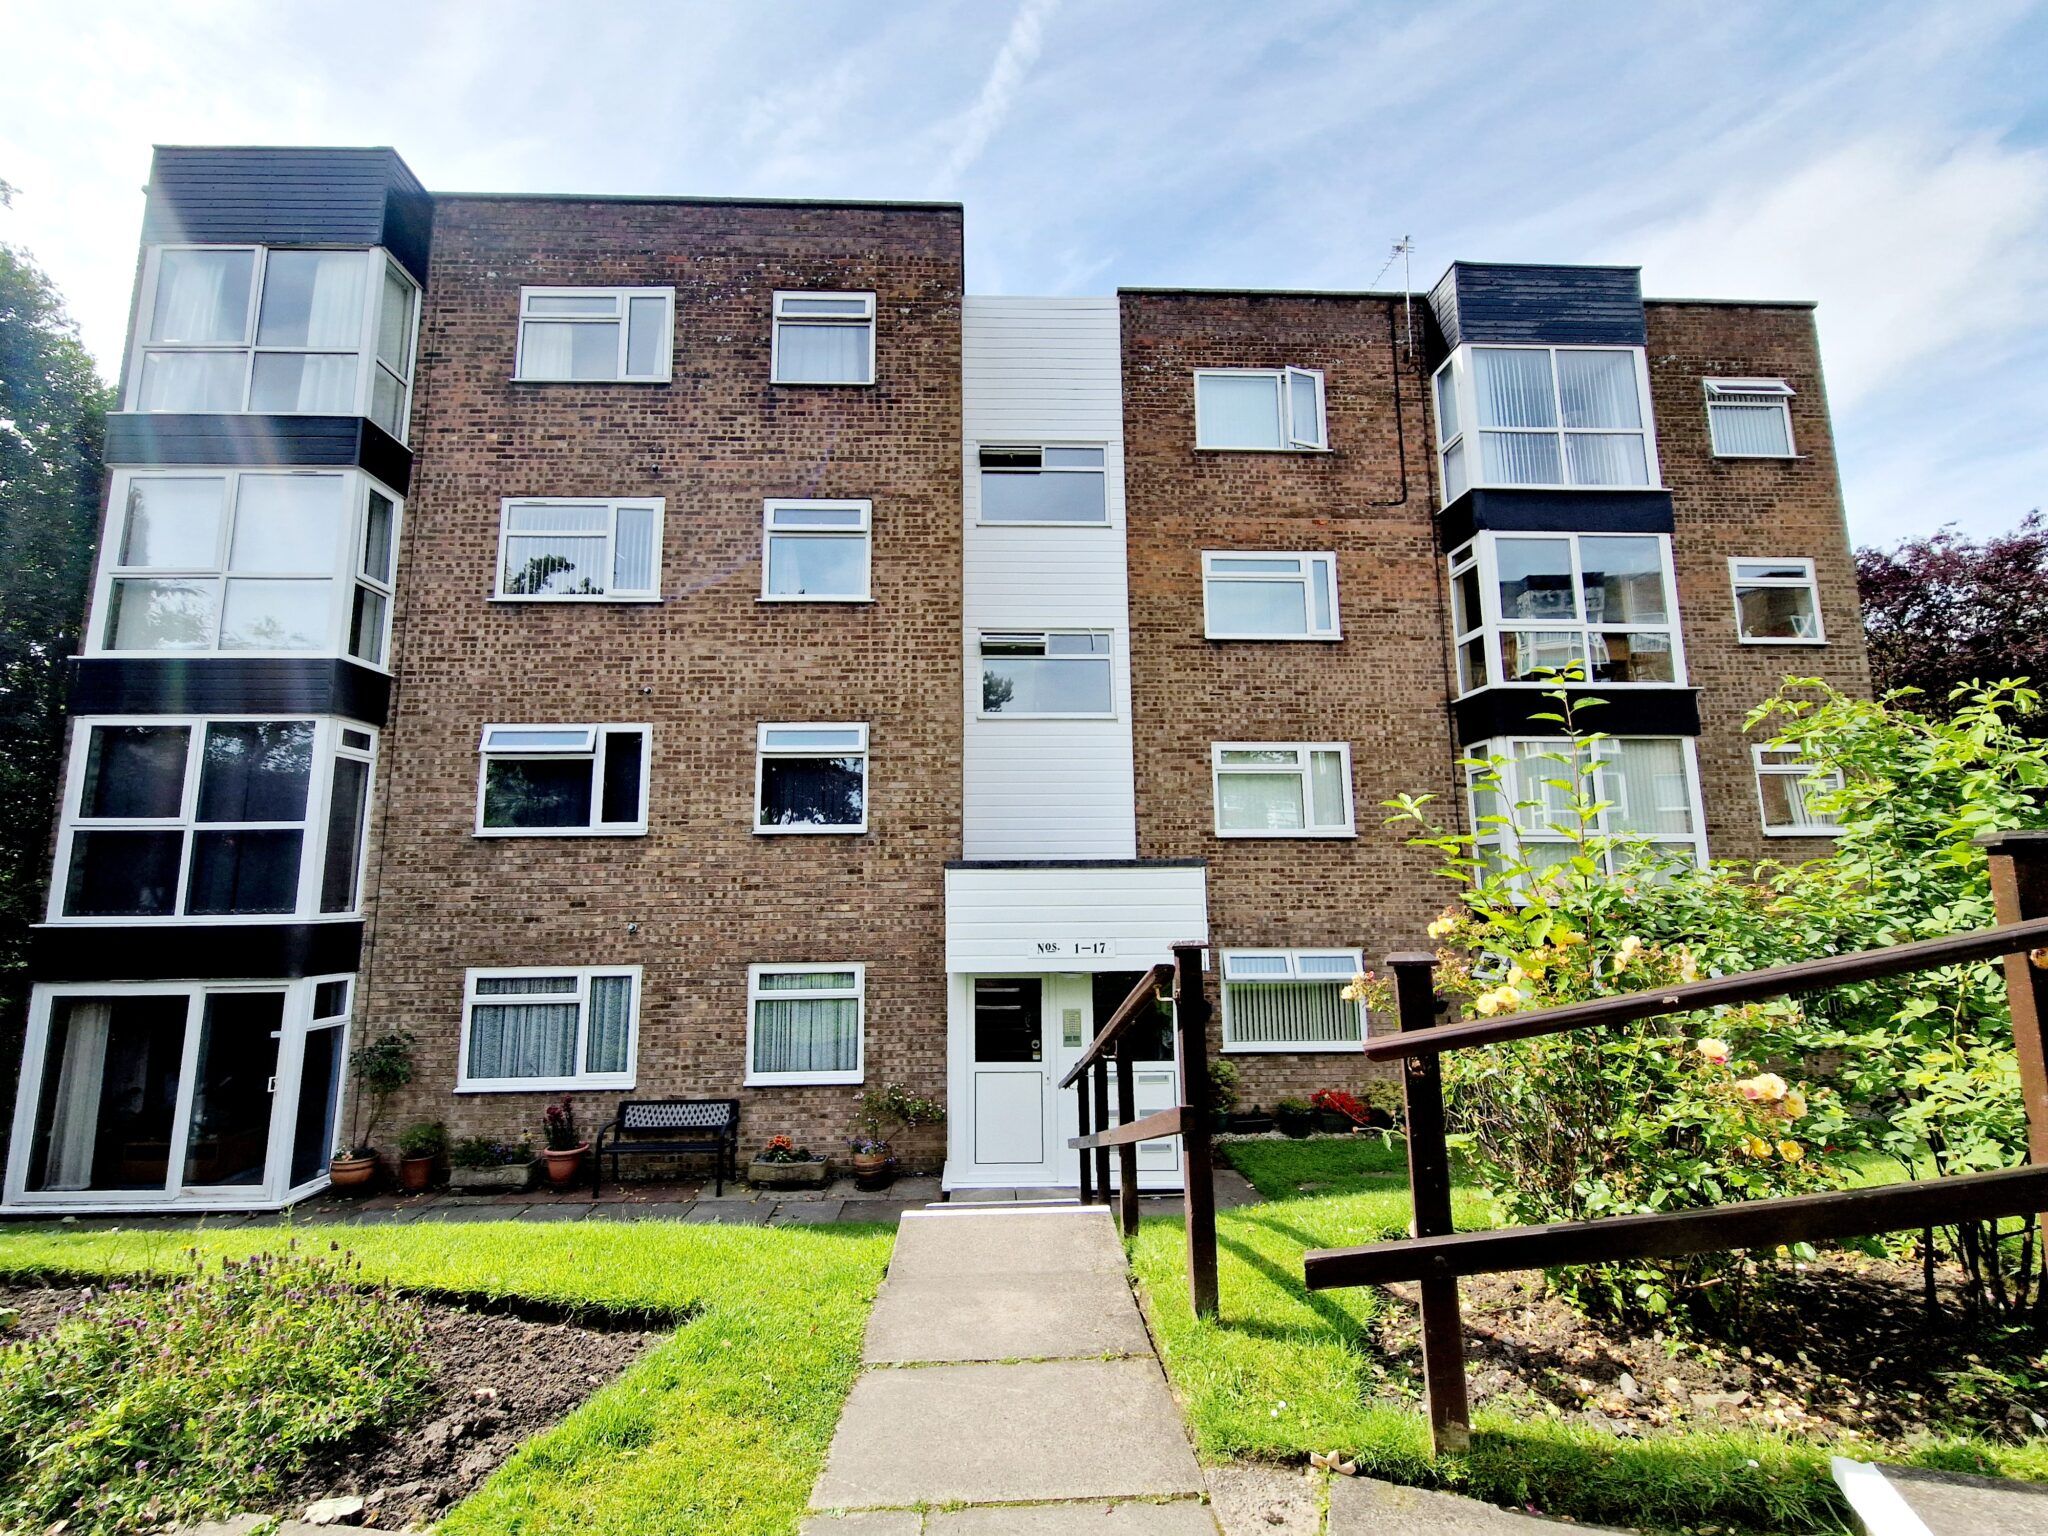 Flat 9, Brentwood Court Lowther Road, Manchester, Prestwich, M25 9PX